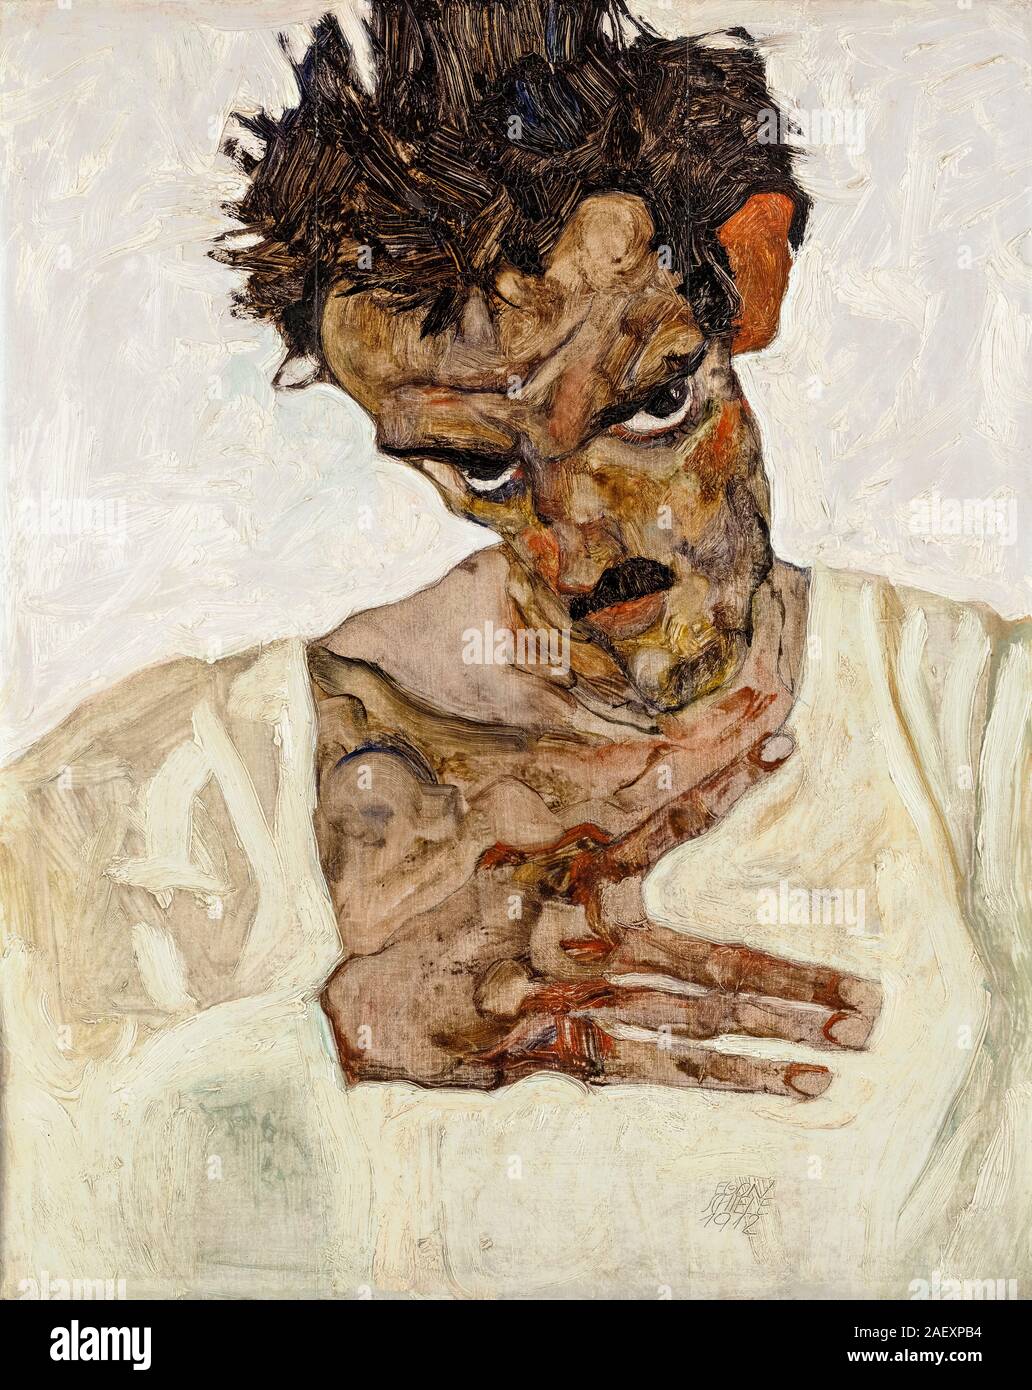 Egon Schiele, Self Portrait with Lowered Head, painting, 1912 Stock Photo